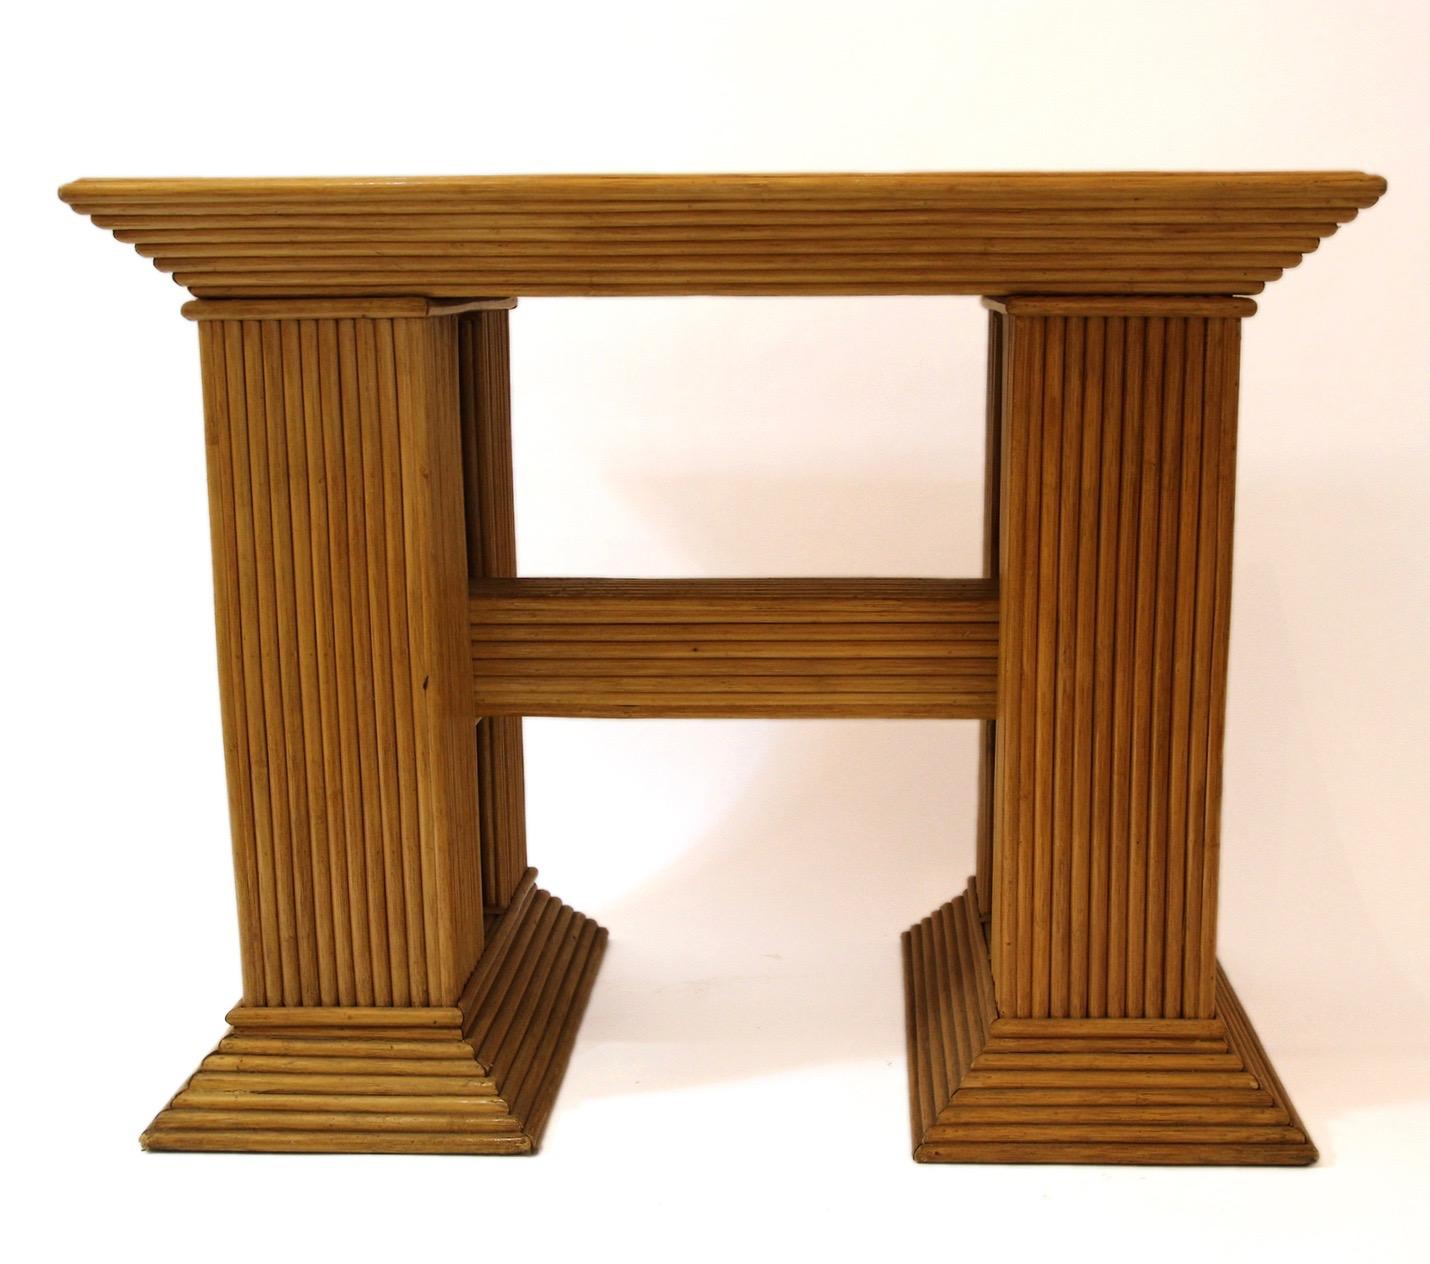 Console, 
Bamboo, 
Rectangular tray, decorated with triangles,
H-base,
circa 1970, France.

Measures: Height 71 cm, width 89 cm, depth 50 cm.